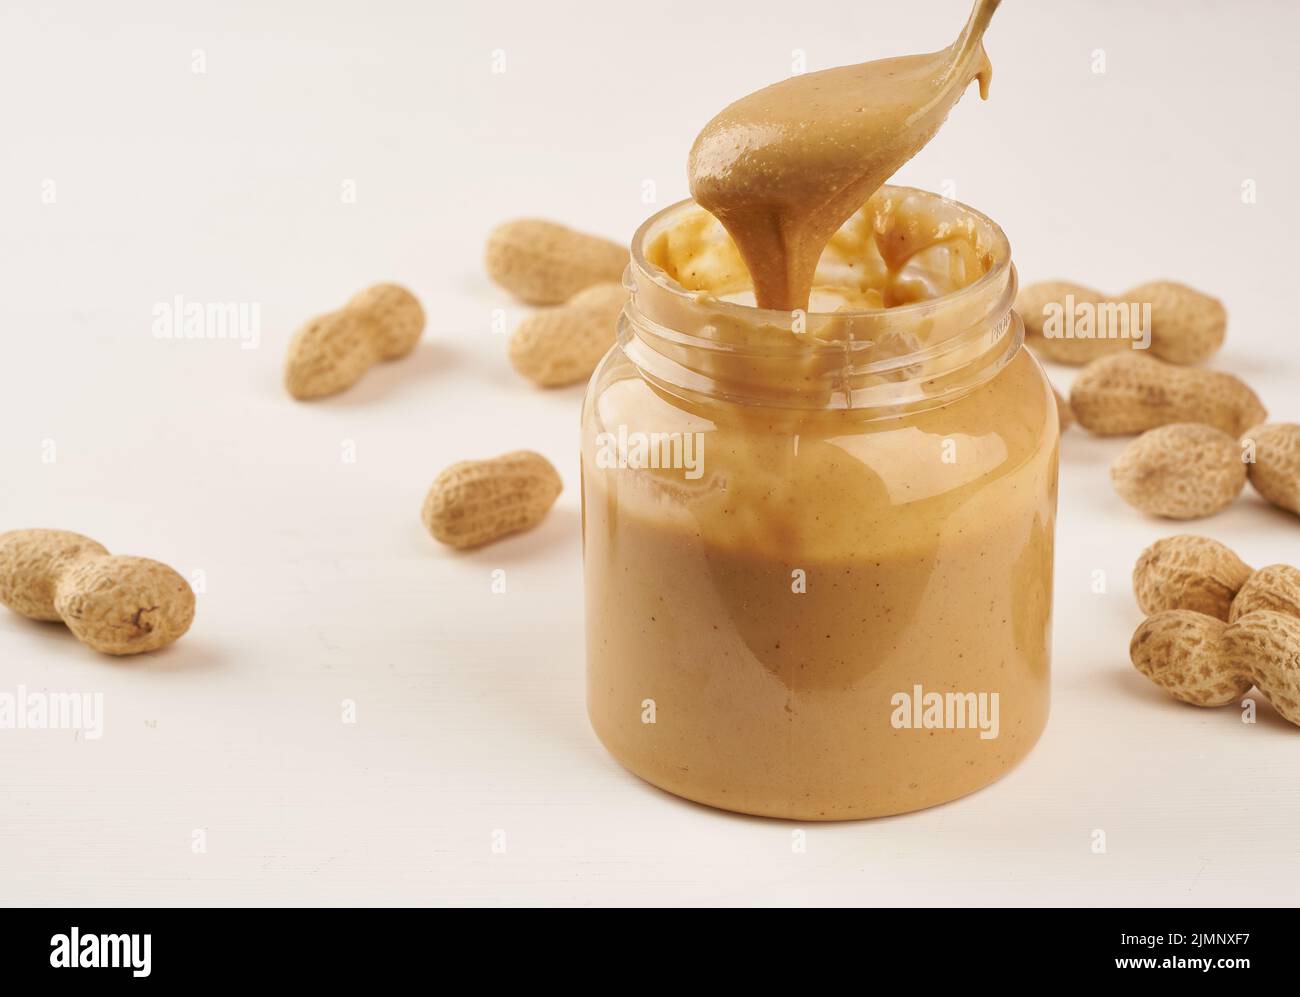 Jar of peanut butter and peanuts in shell on a white table, side view, fresh ground crushed nuts, side view Stock Photo